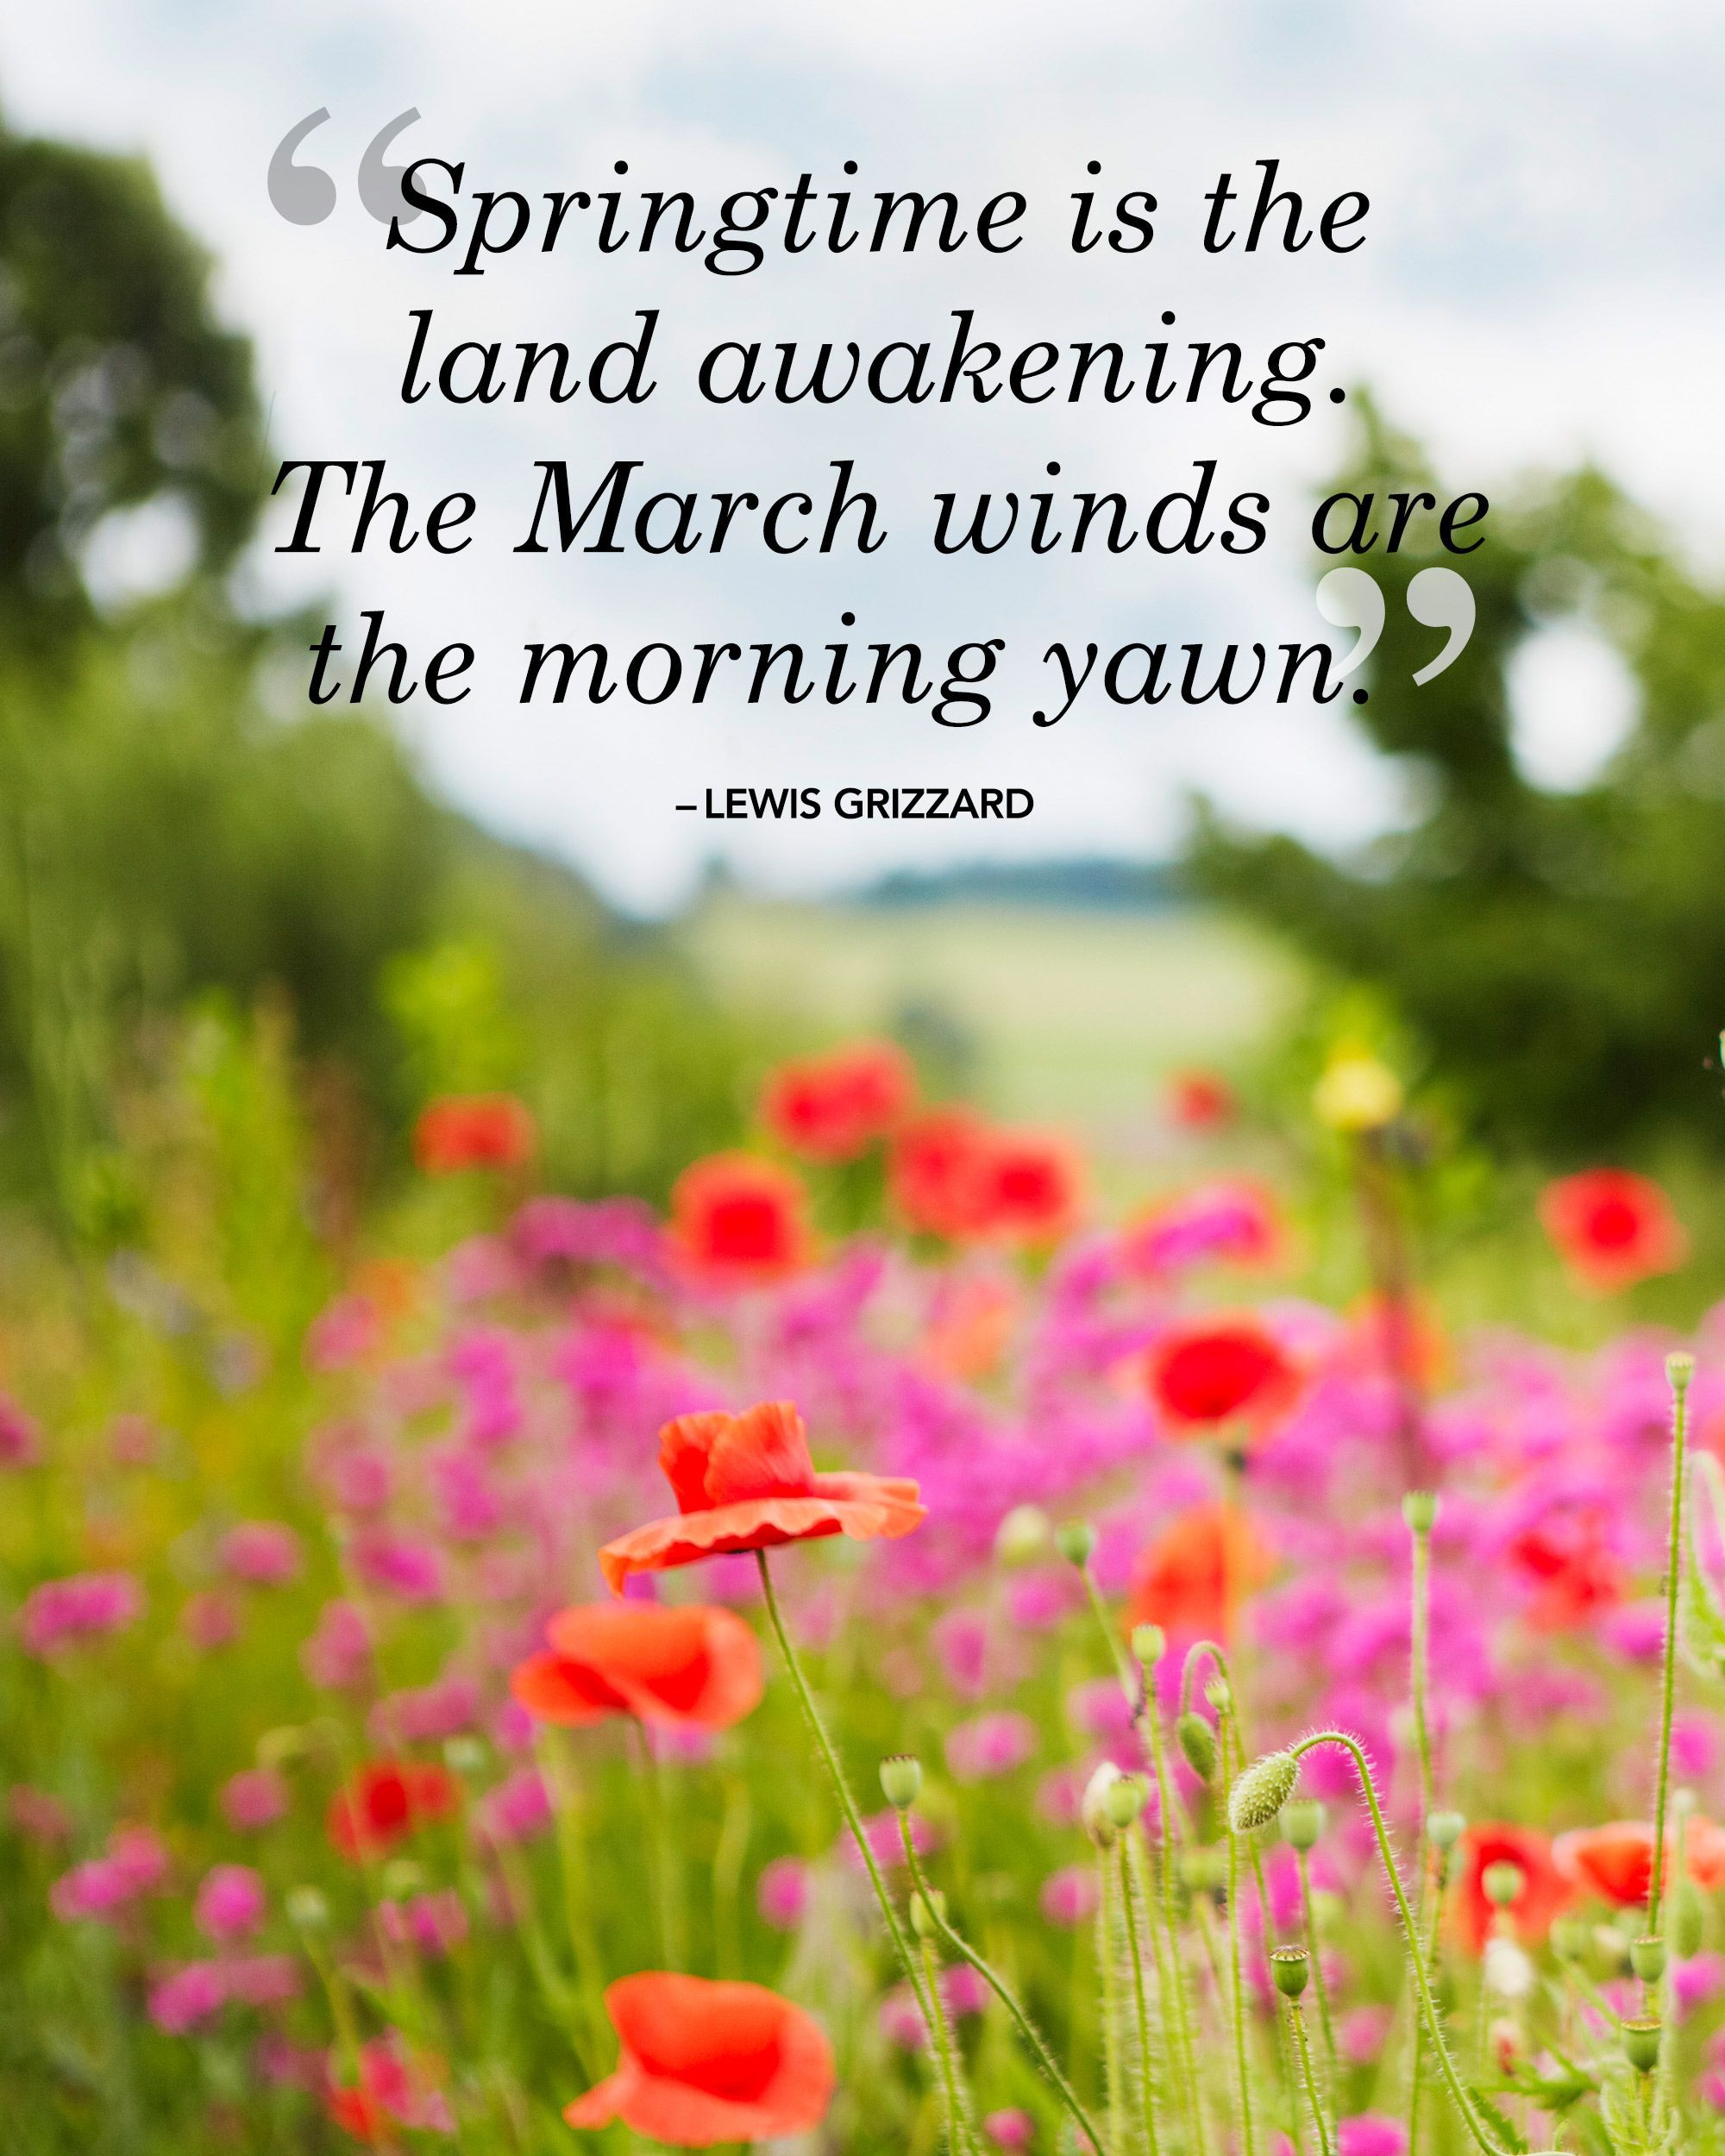 The Sweetest Spring Quotes to Welcome the Season of Renewal